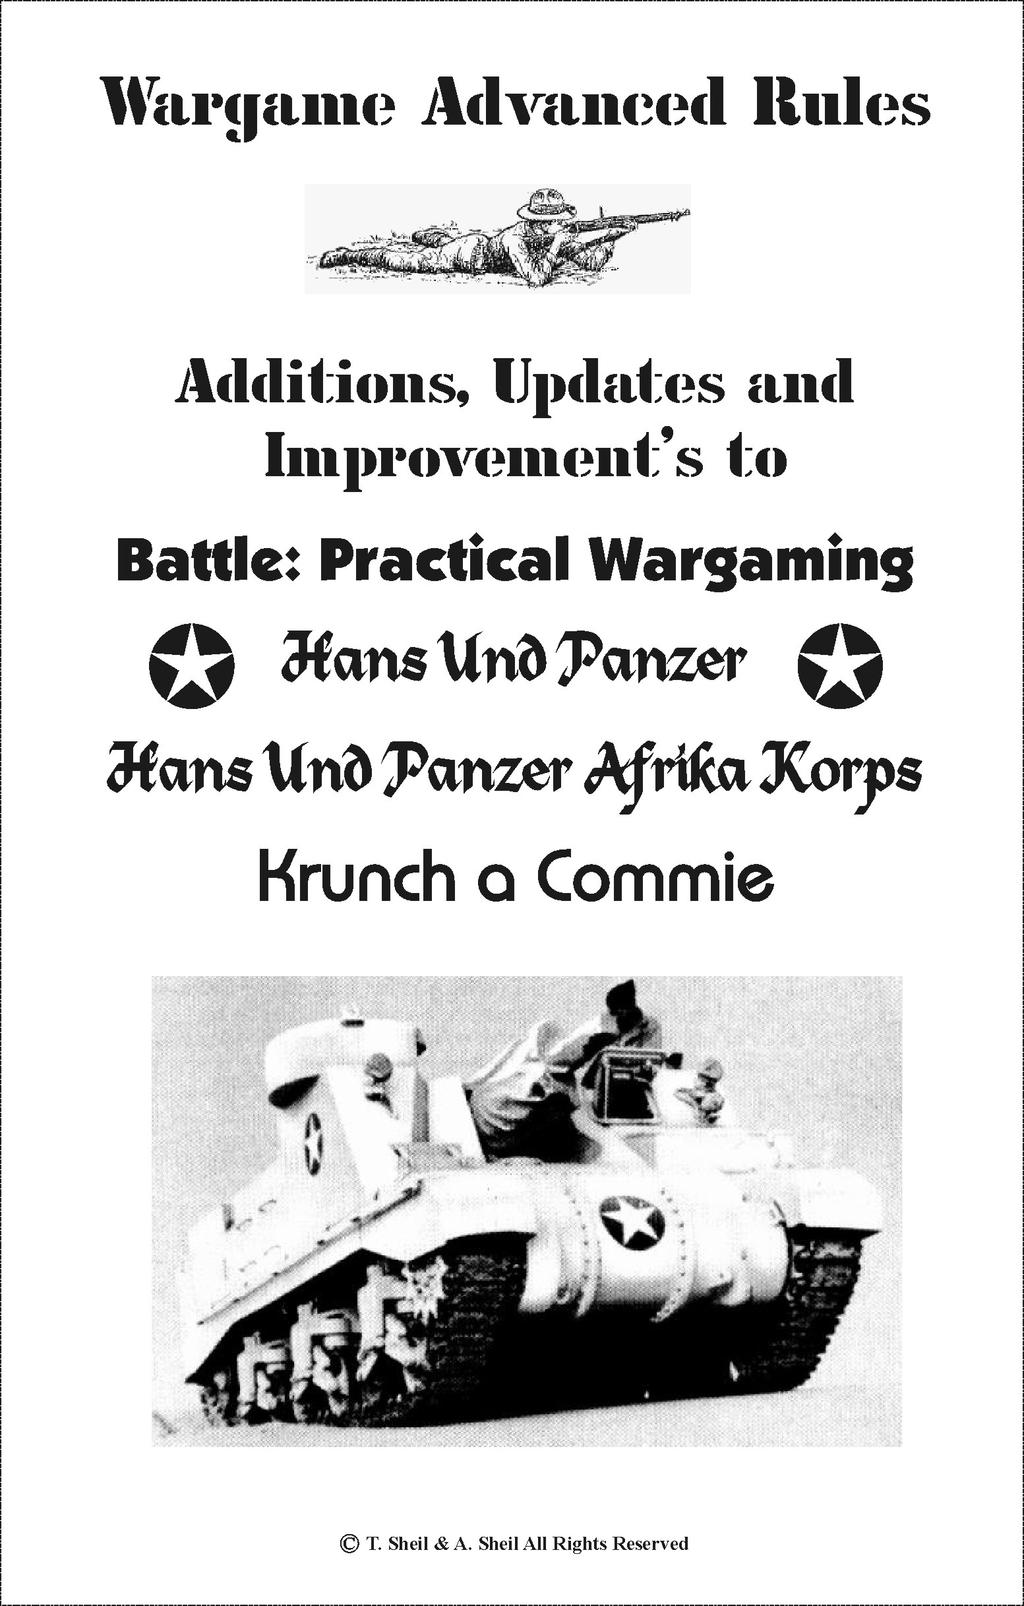 Additions,and Updates to Wargame Rules.